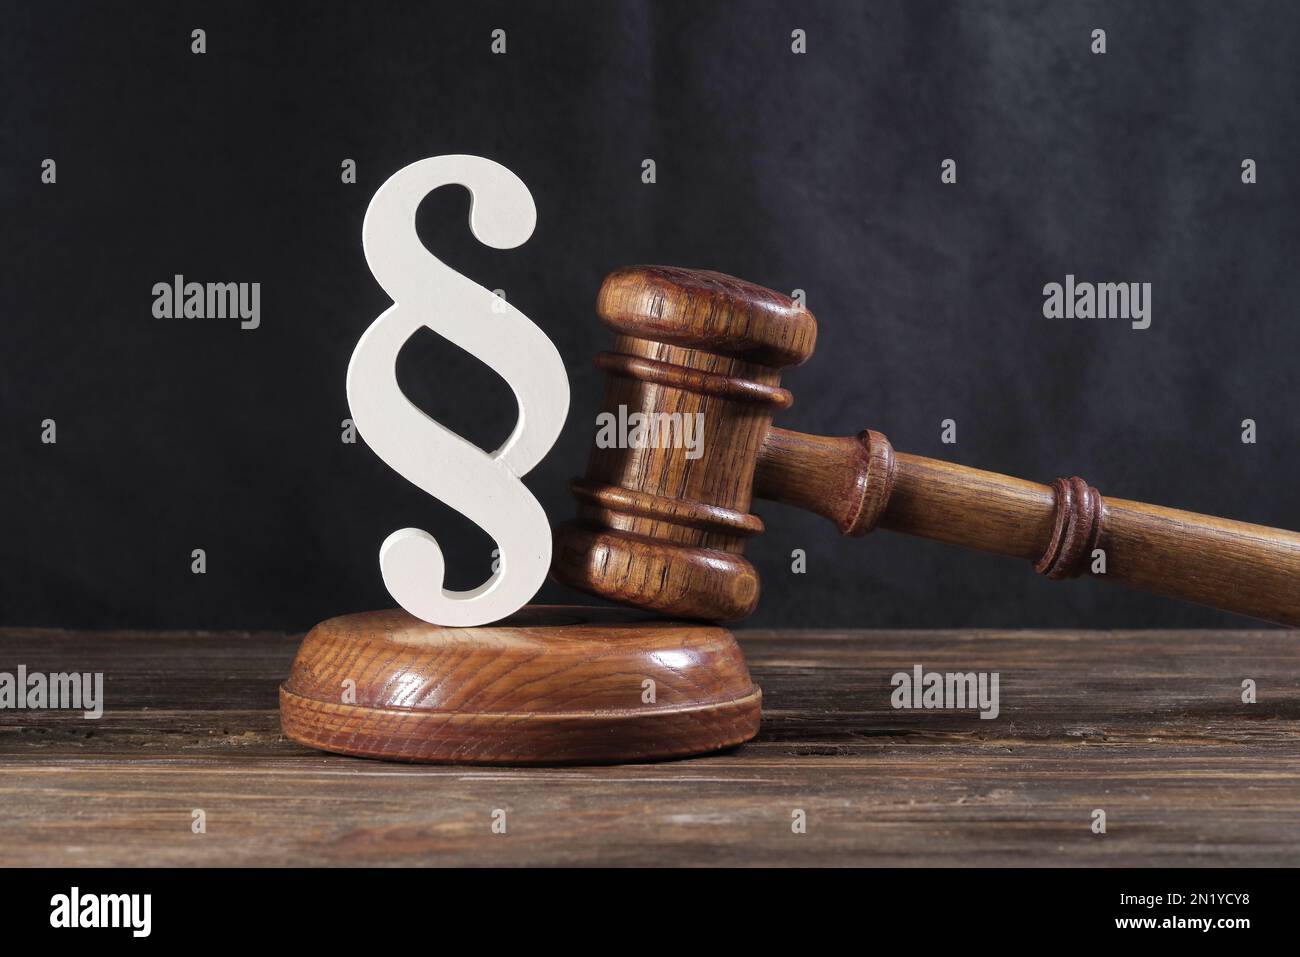 Legal concept of law and justice. Law and justice in everyday life Stock Photo